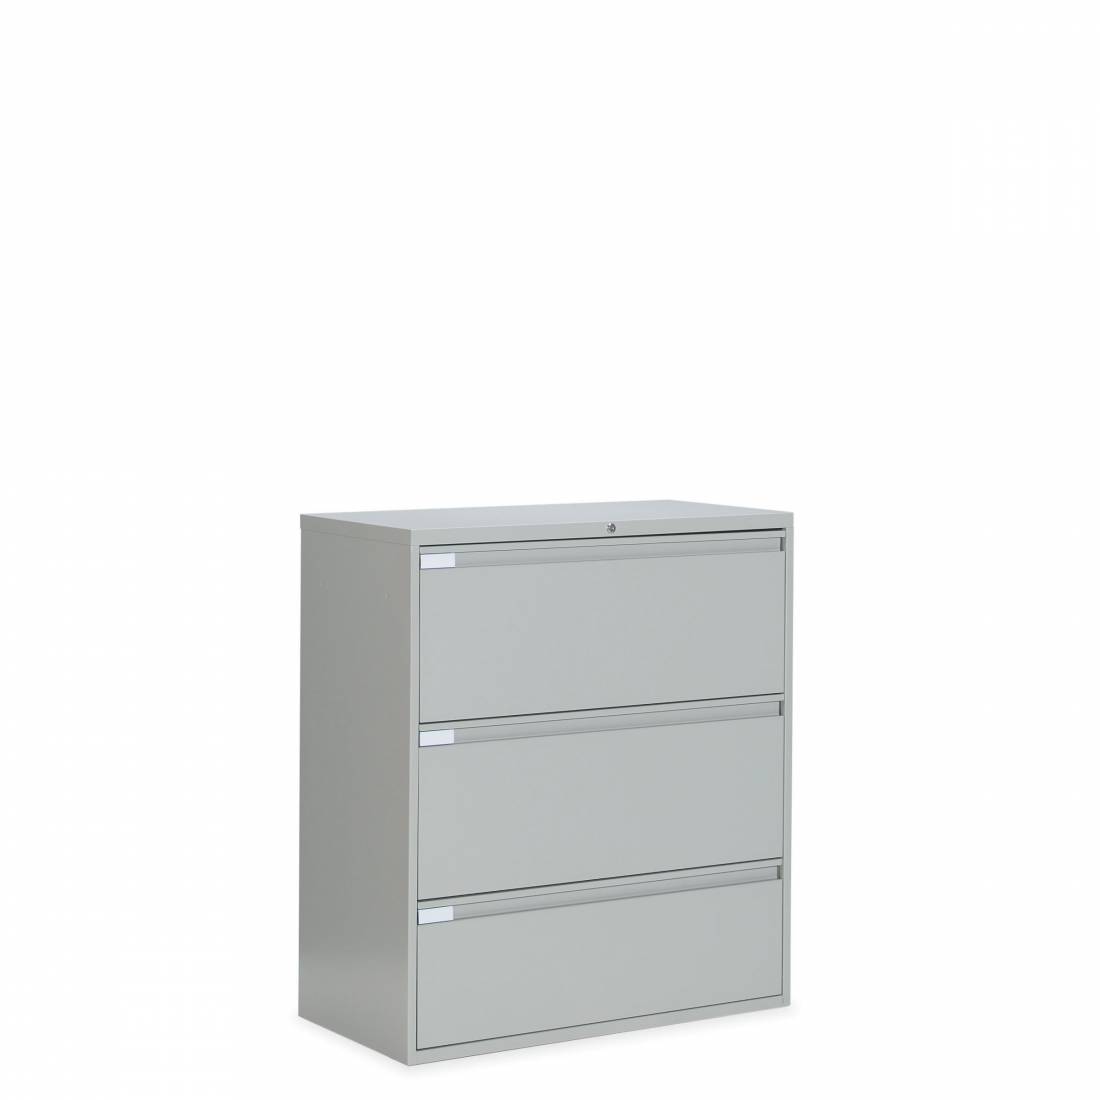 36”W 3 Drawer Lateral File